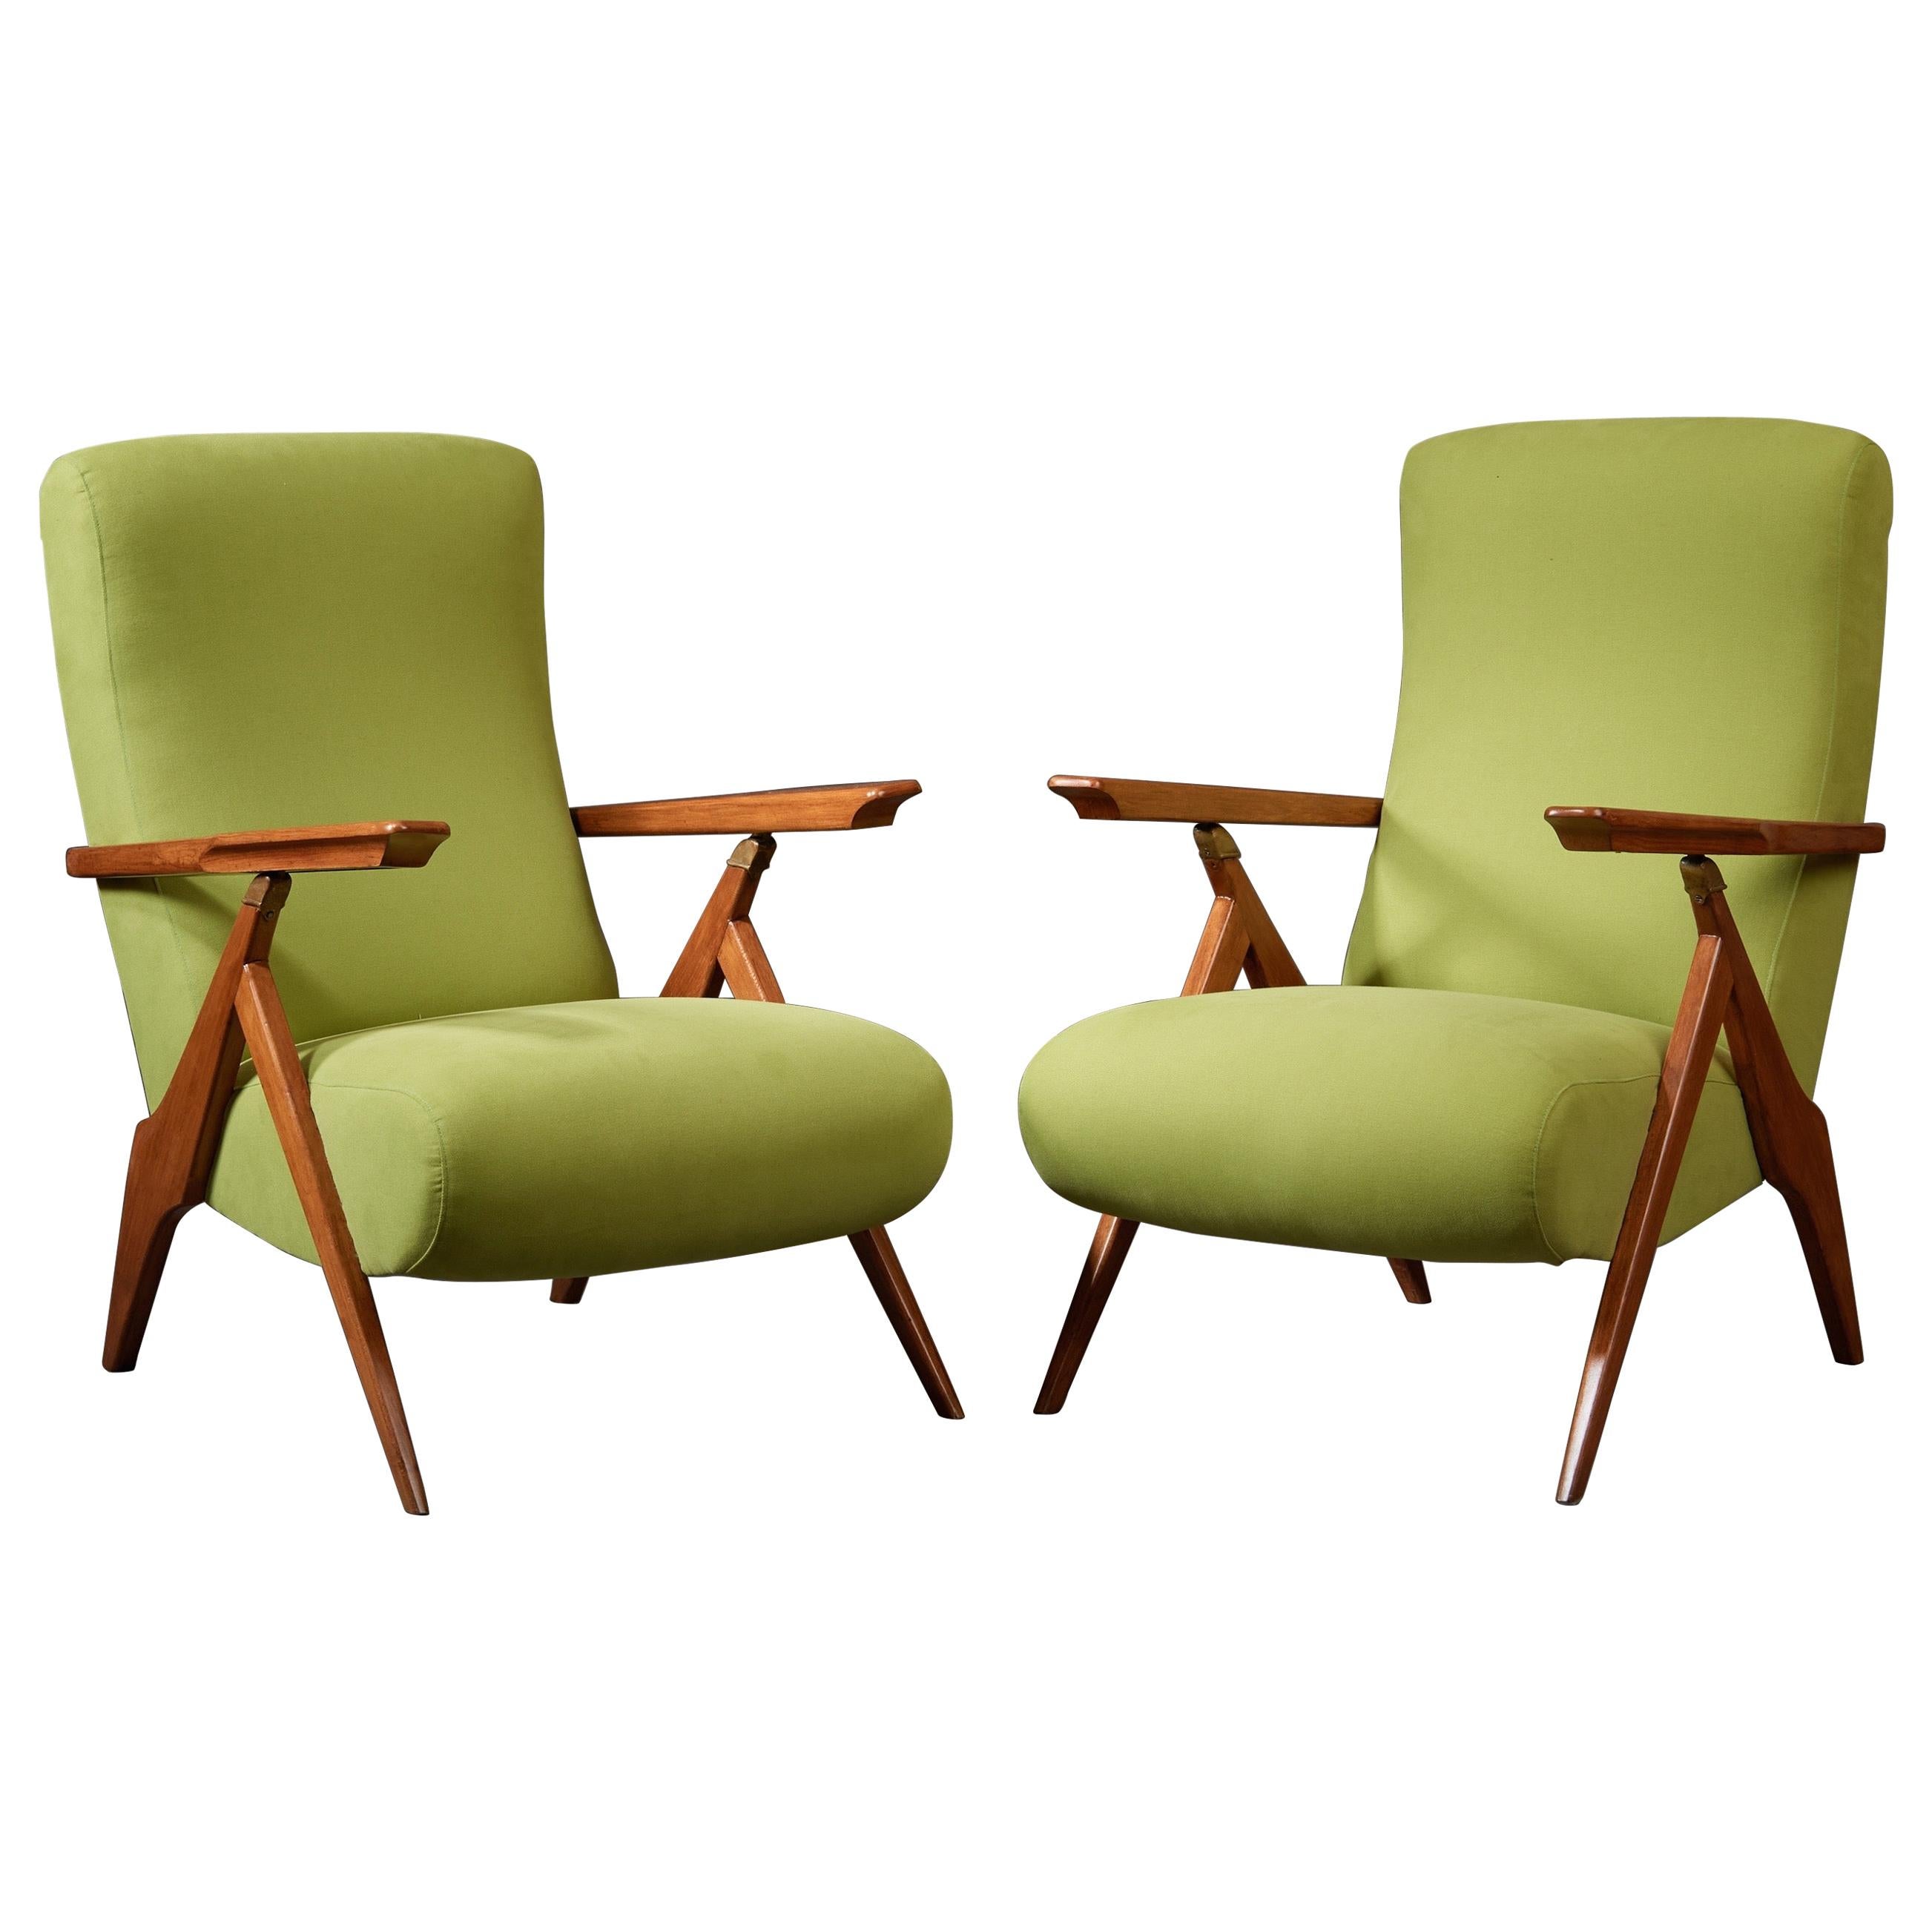 Elegant Pair of Reclining Green Armchairs in Fruitwood and Brass, Italy 1950s For Sale